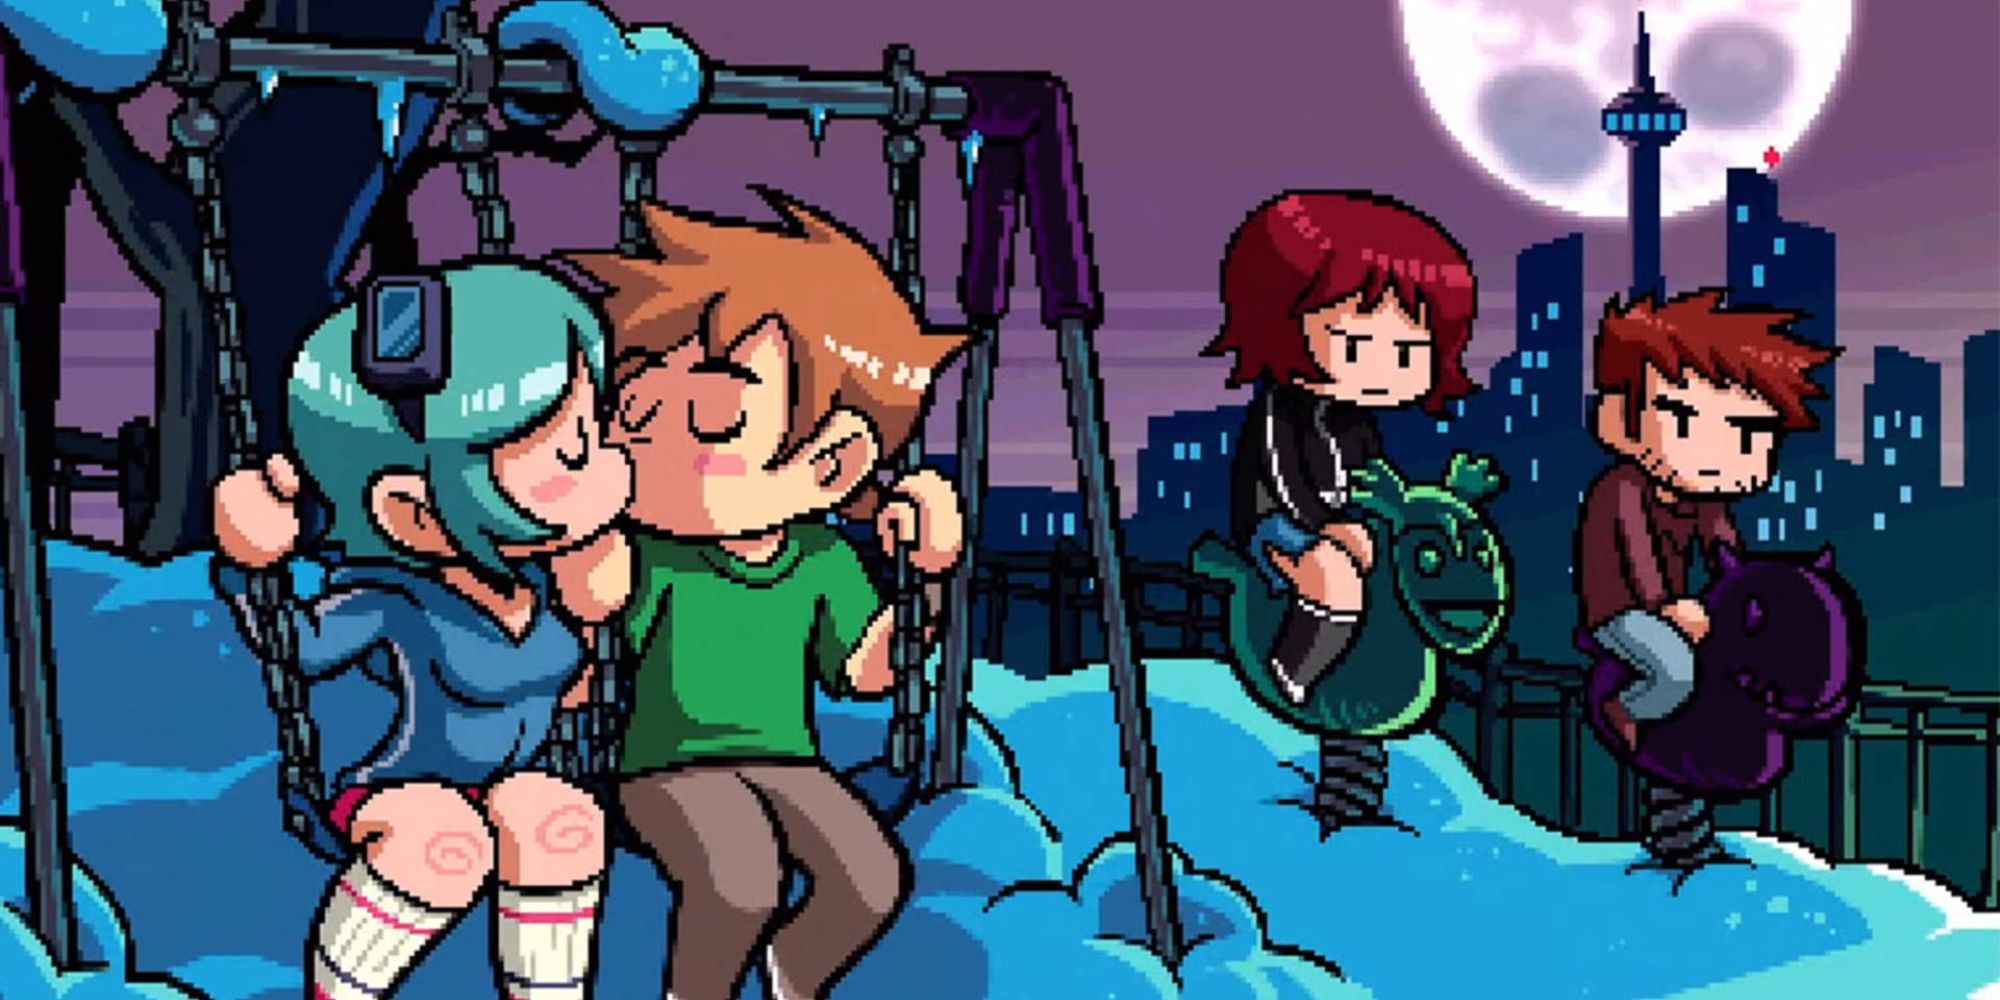 Scott Pilgrim and Ramona Flowers kiss on a swing set while Kim Pines and Stephen Stills look miserable on spring riders